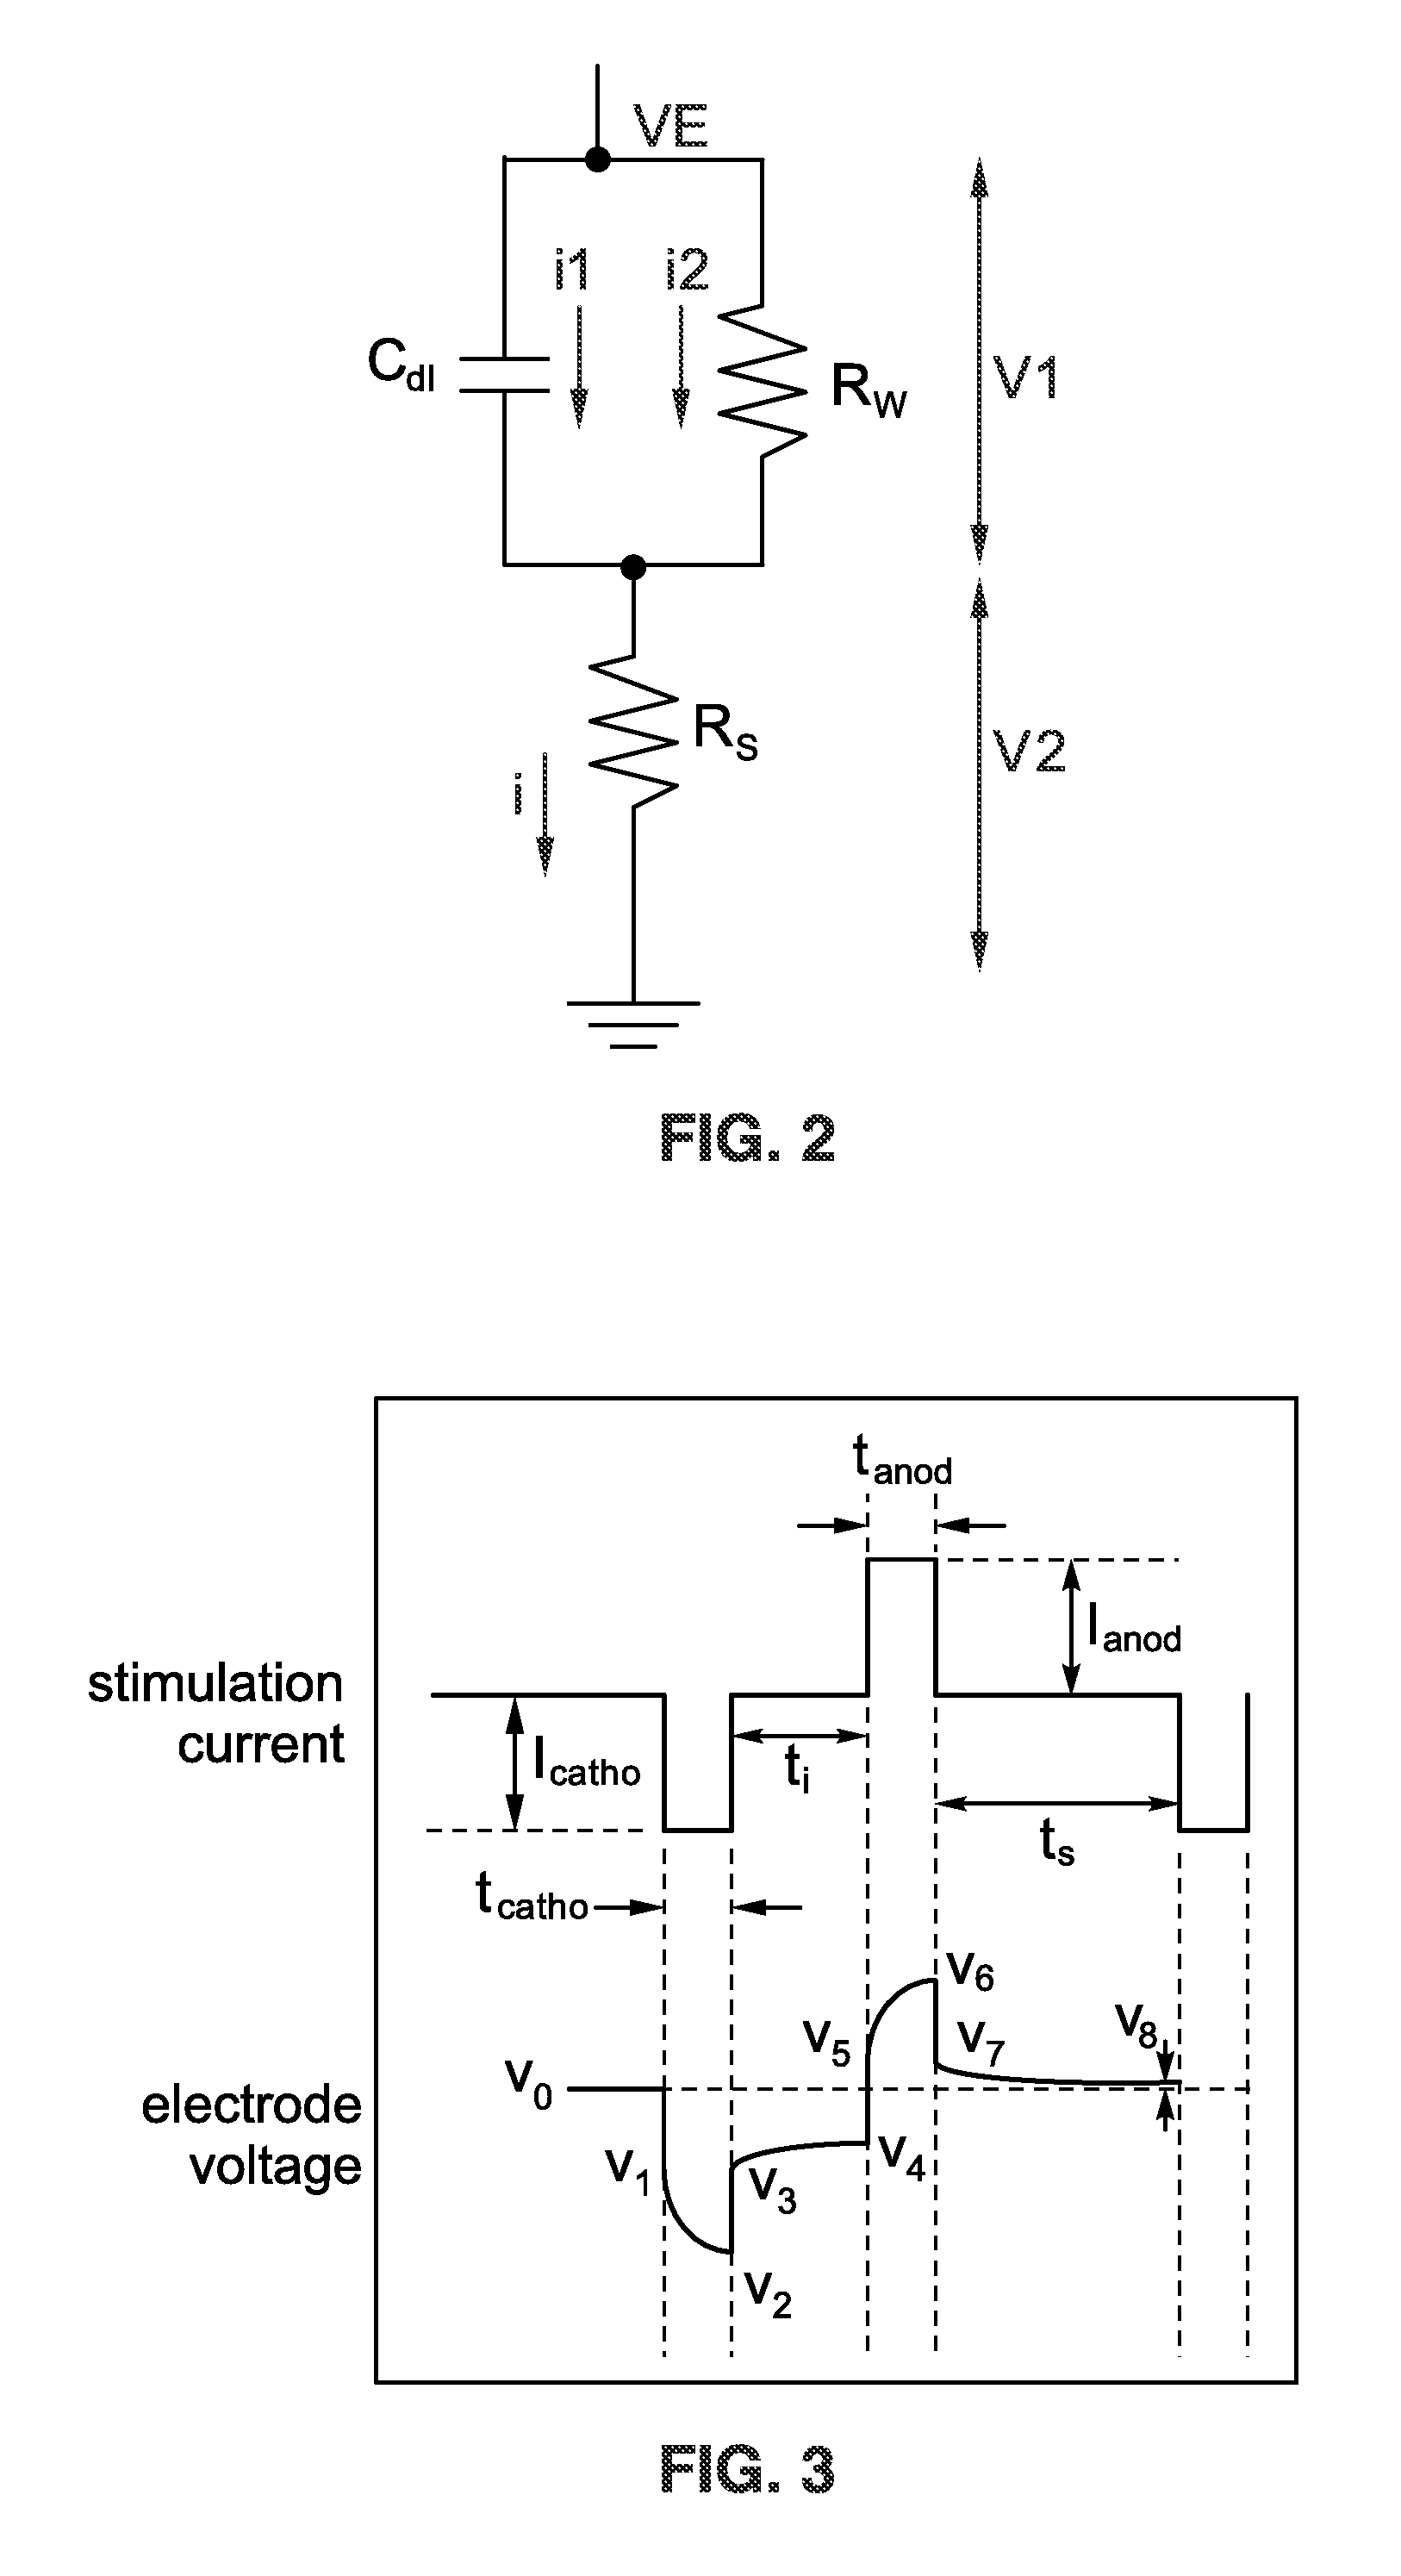 Electrical charge balancing method for functional stimulation using precision pulse width compensation